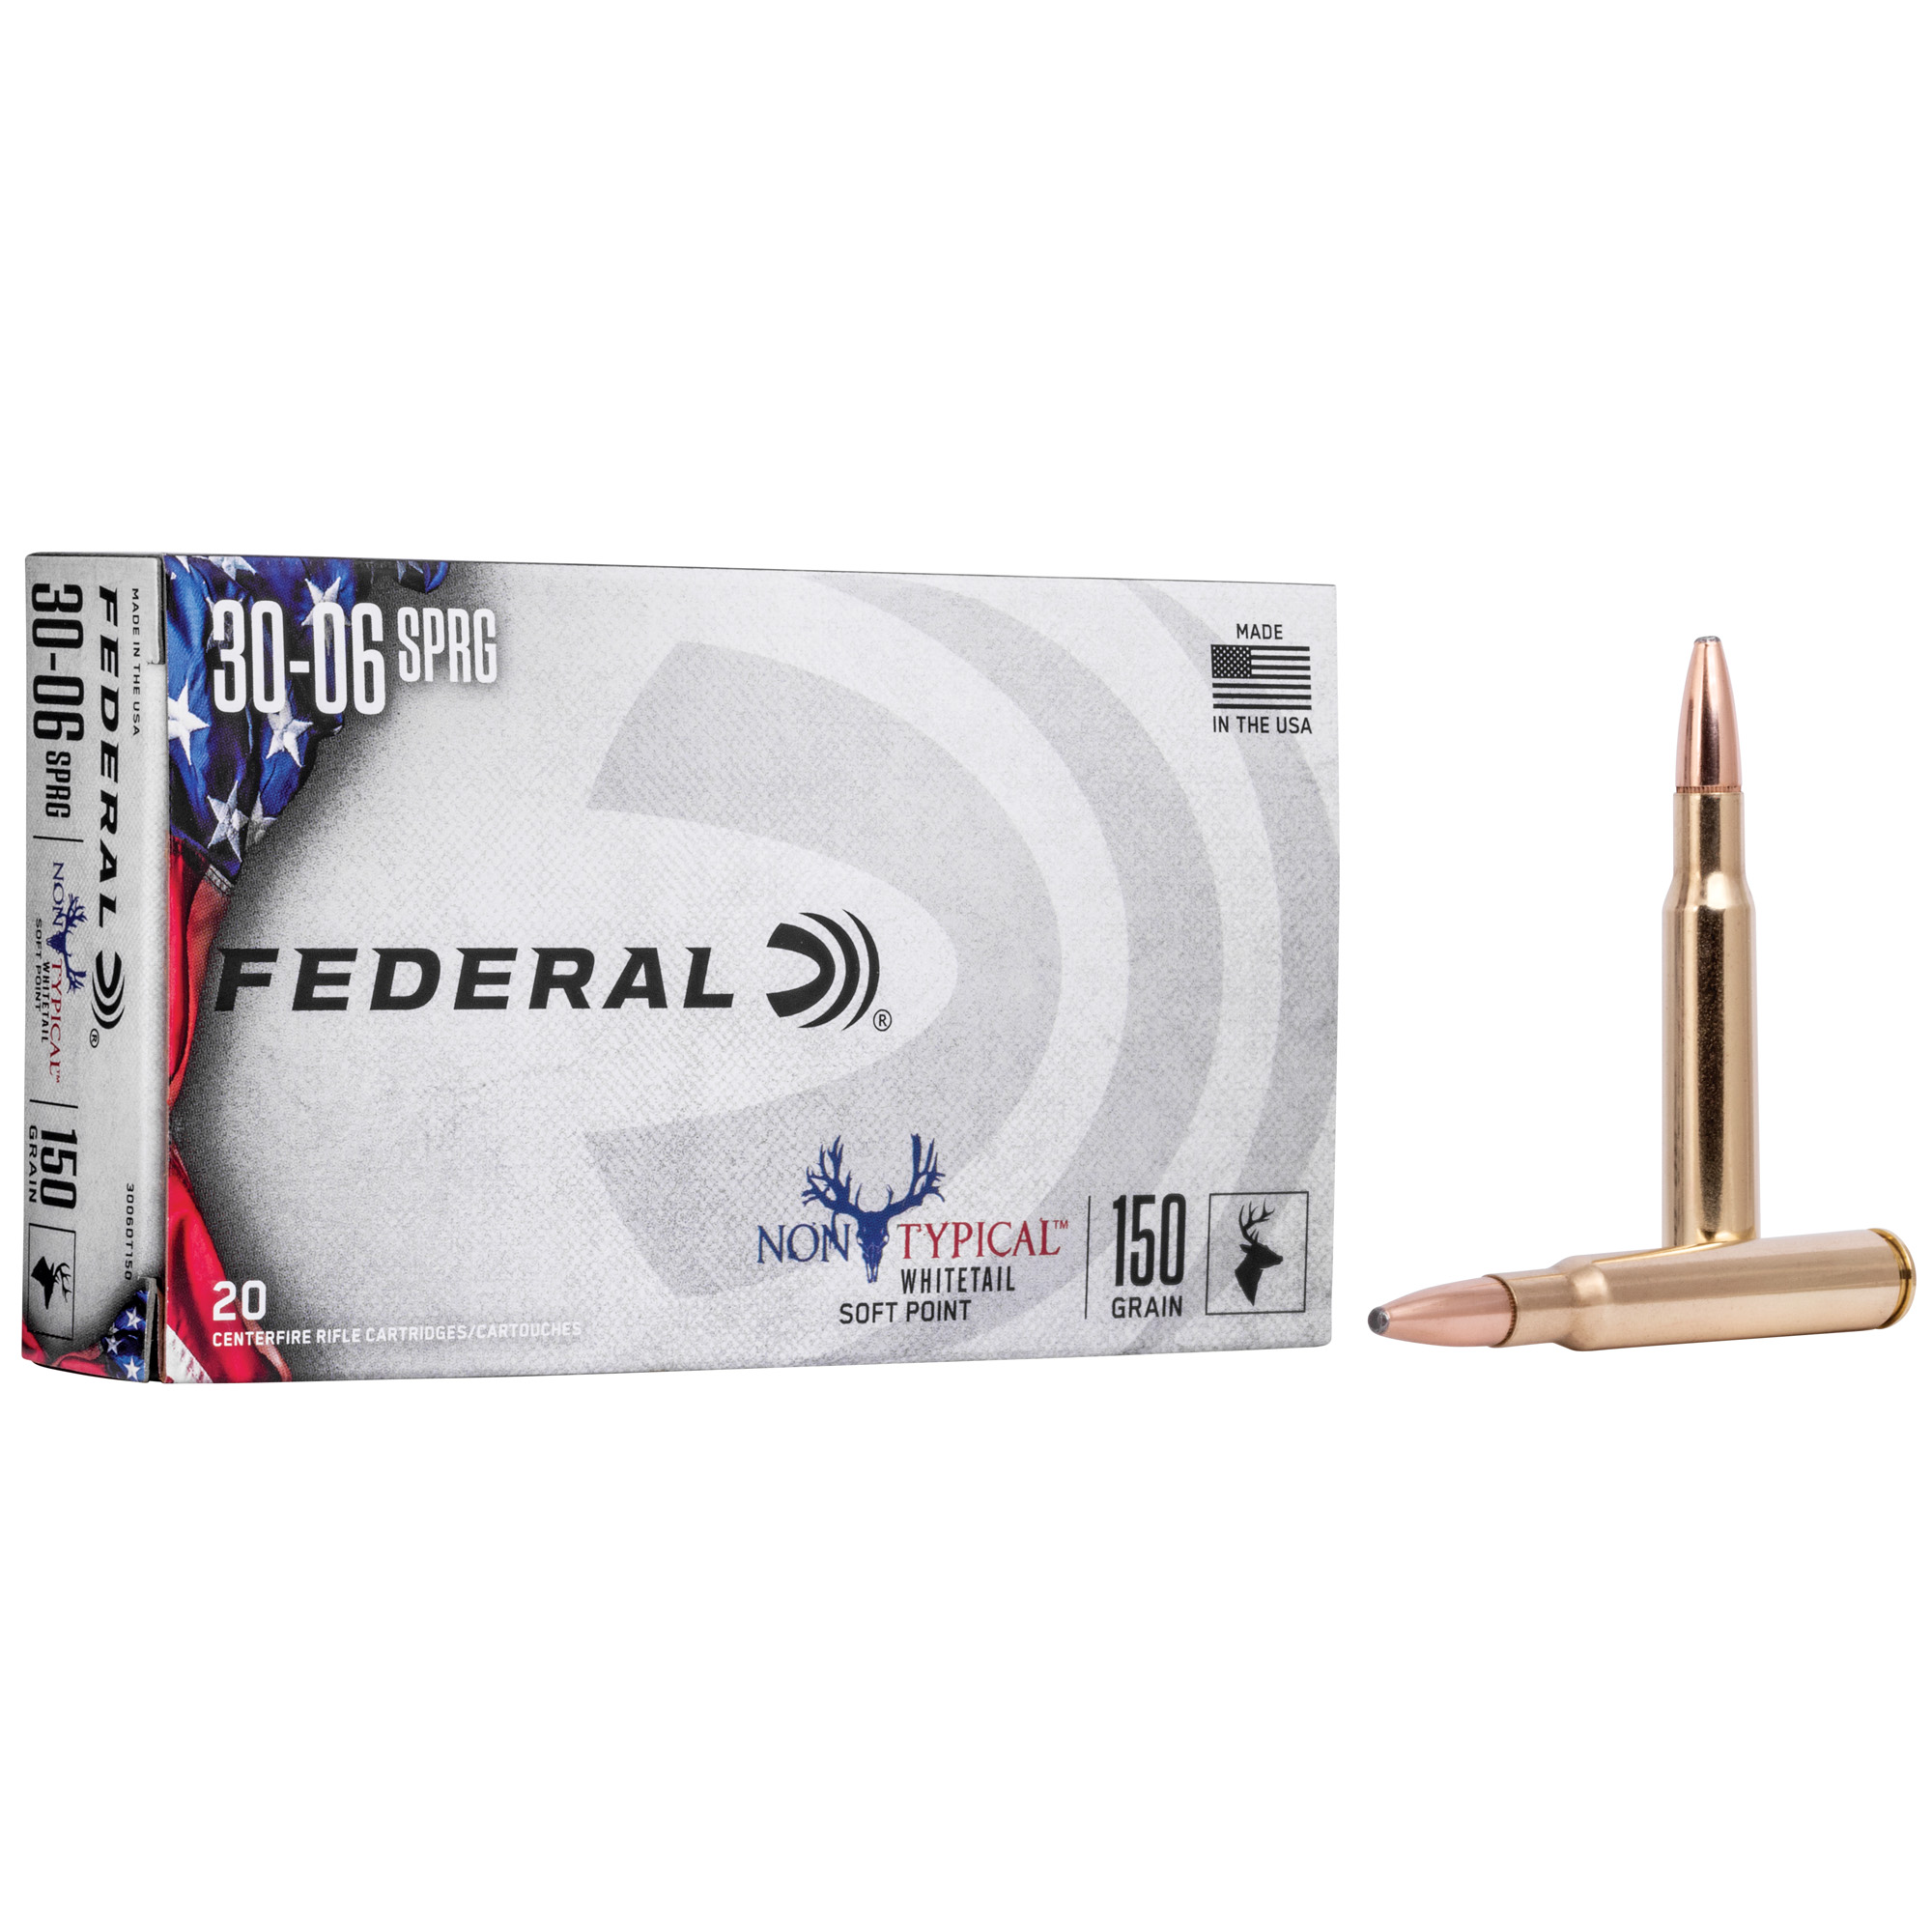 Federal, Non Typical, 30-06, 150Gr, Soft Point, 20 Round Box